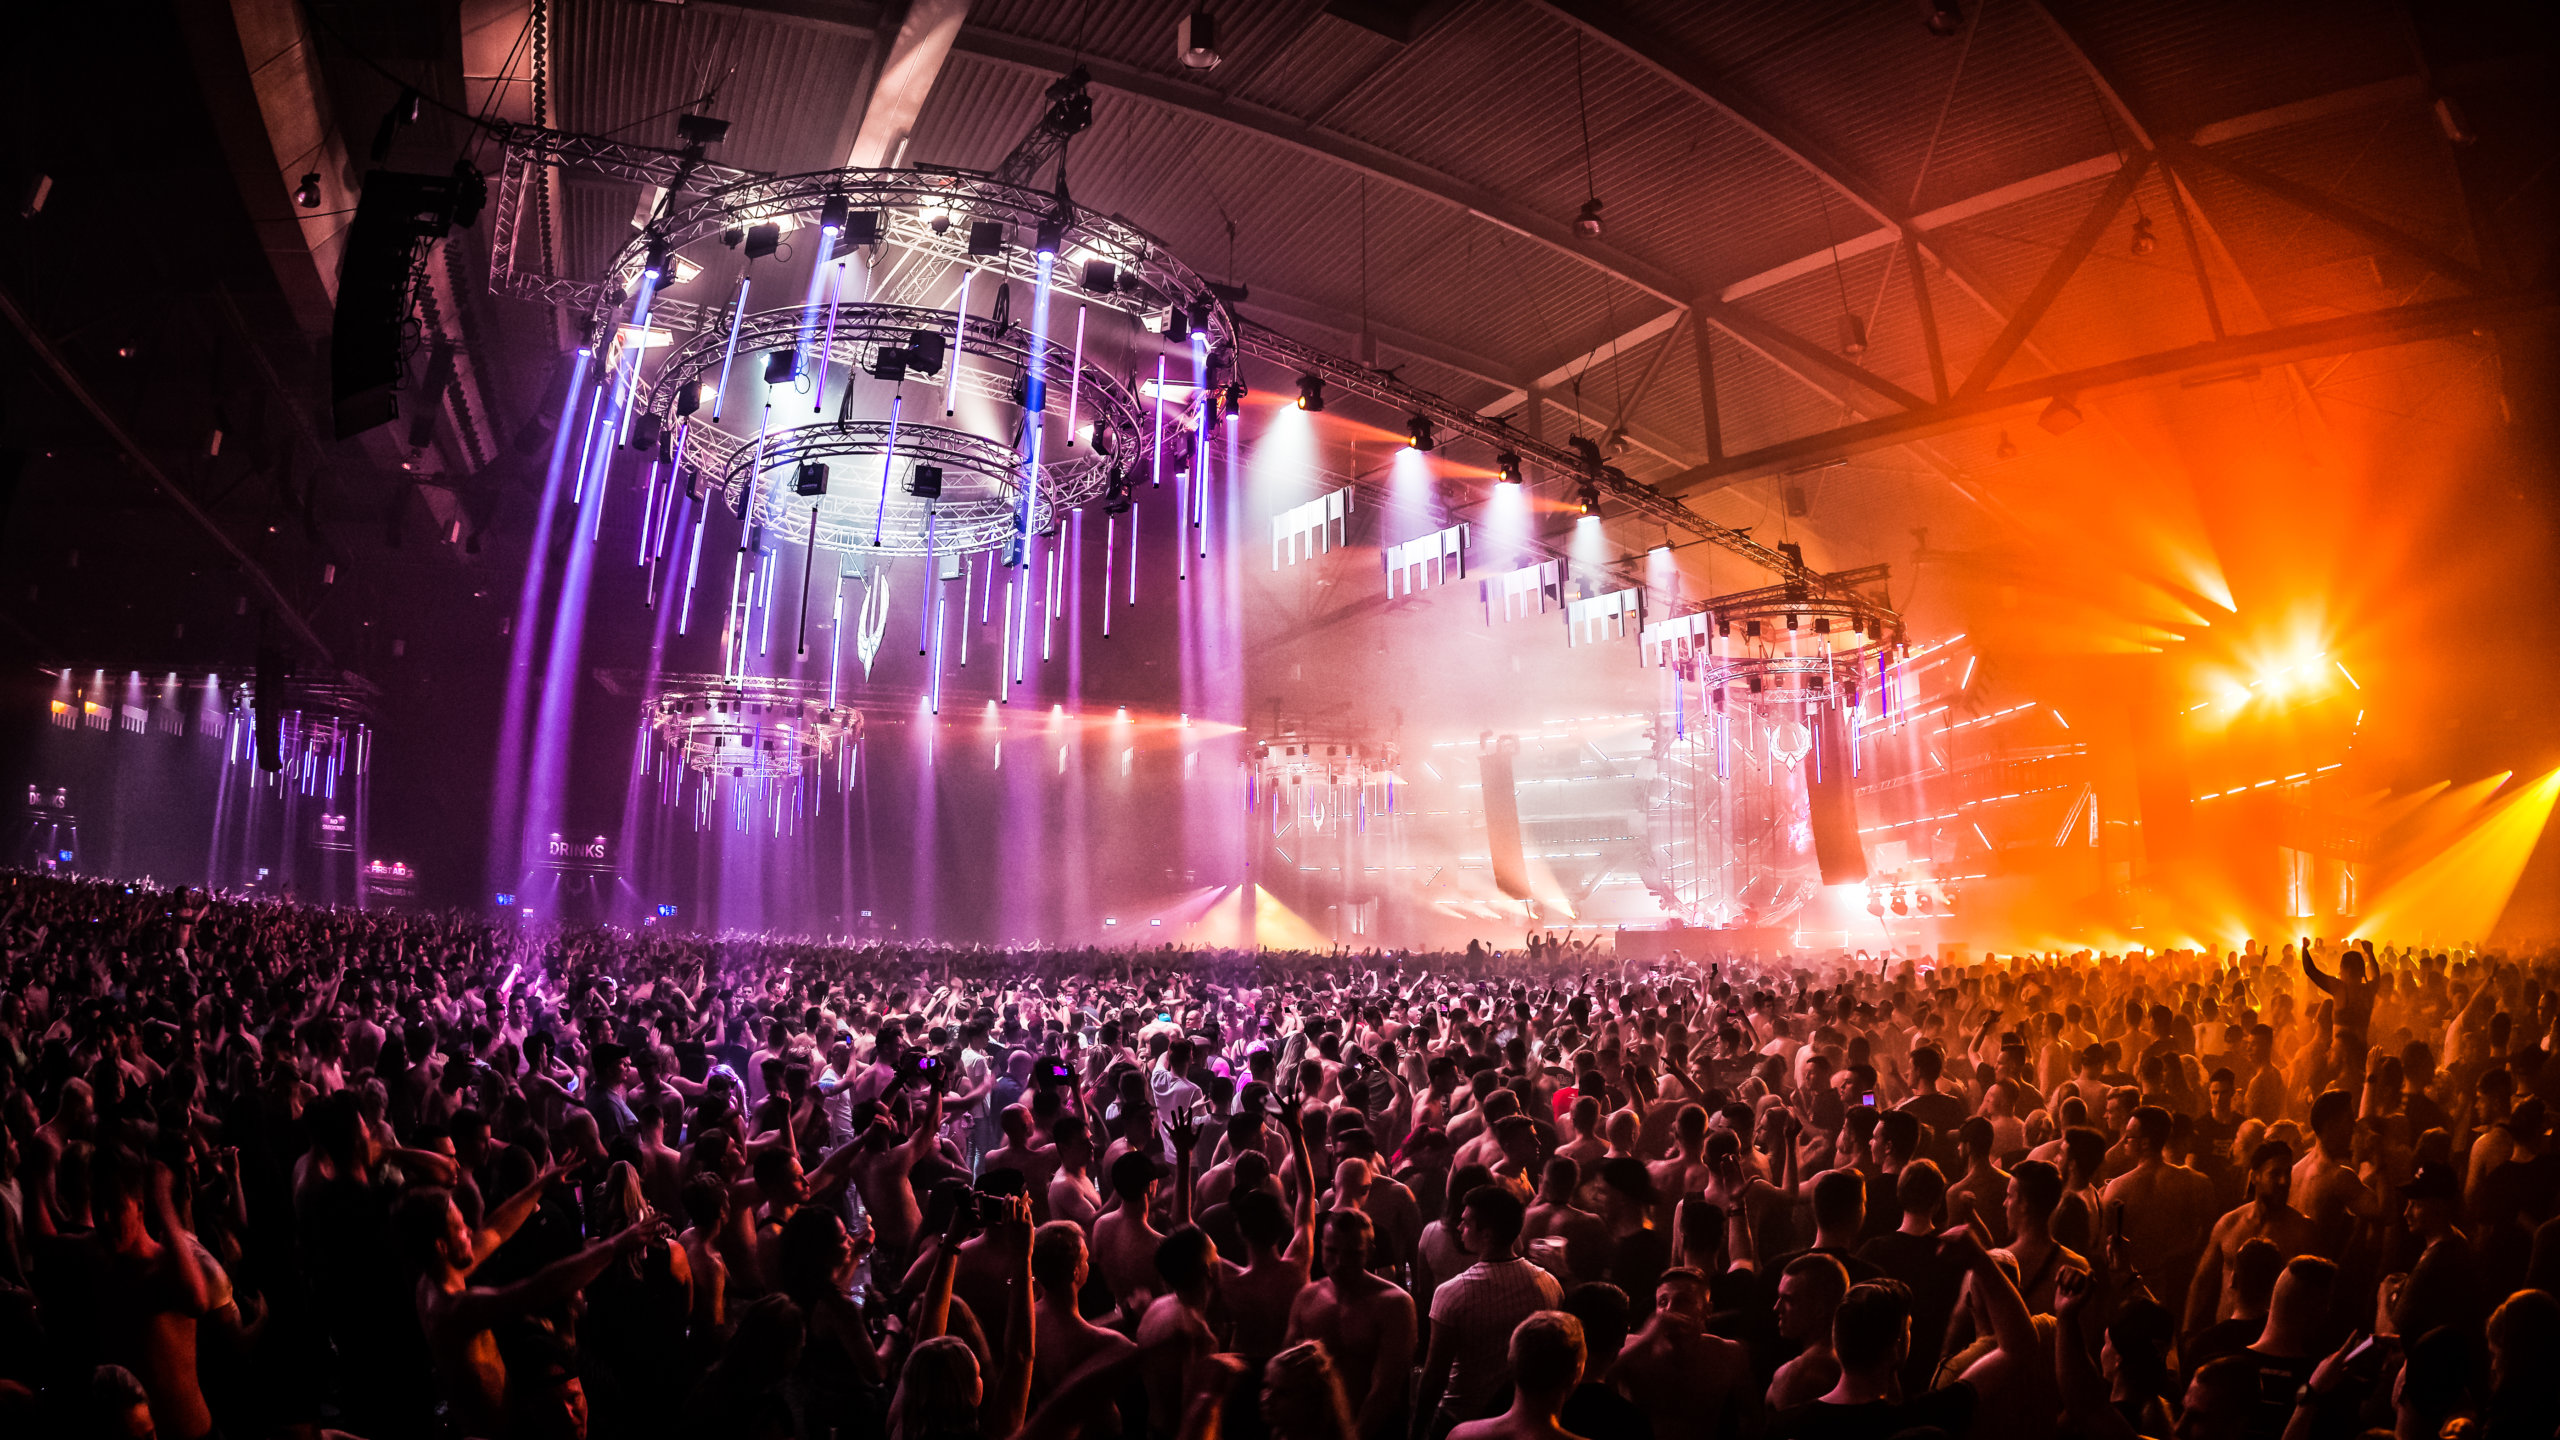 Prepare yourself for Supremacy 2019 with this warm-up mix